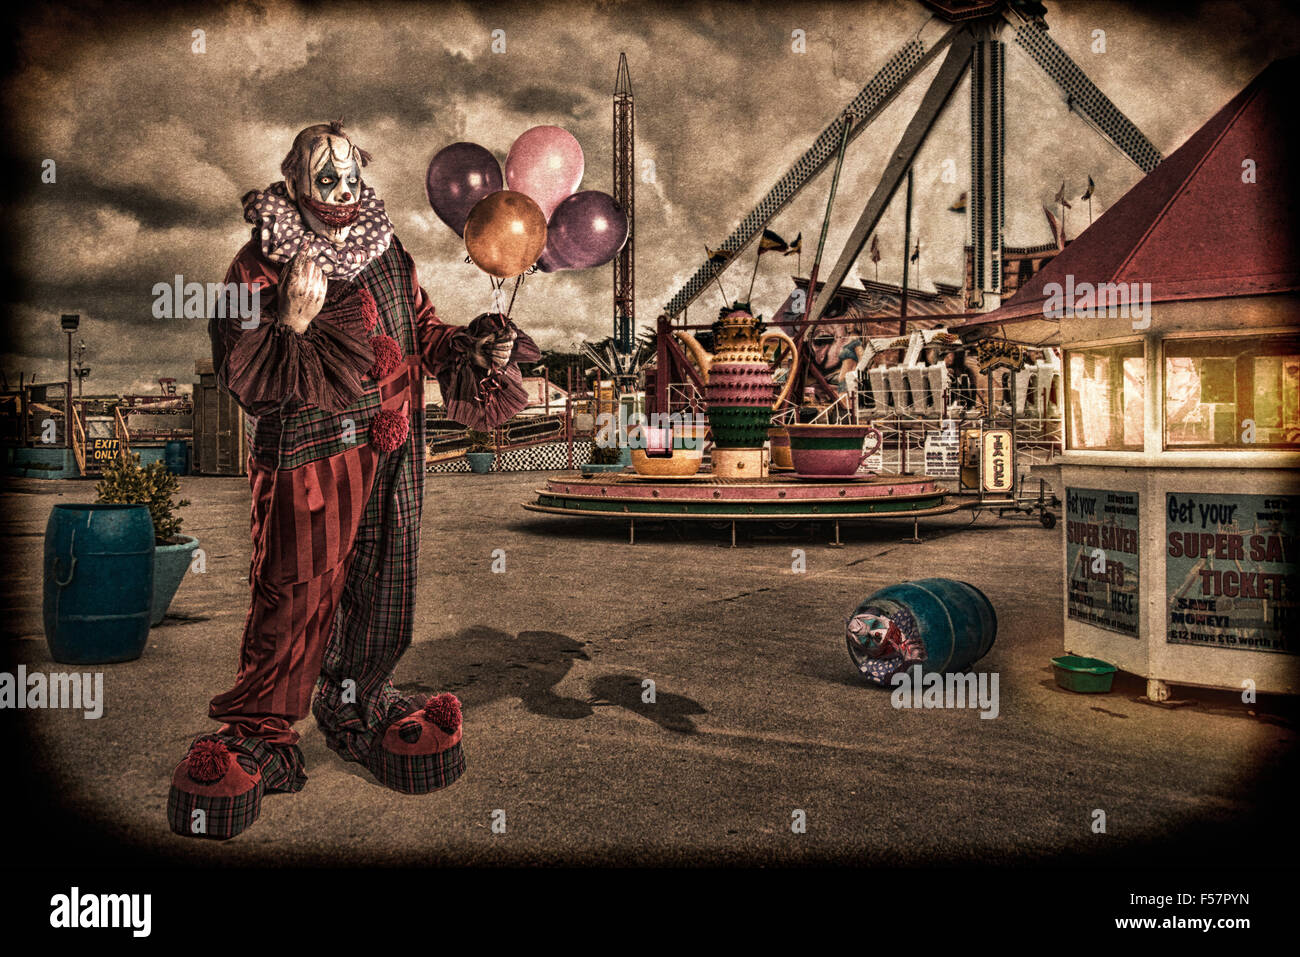 Scary/creepy clown in vintage style Stock Photo